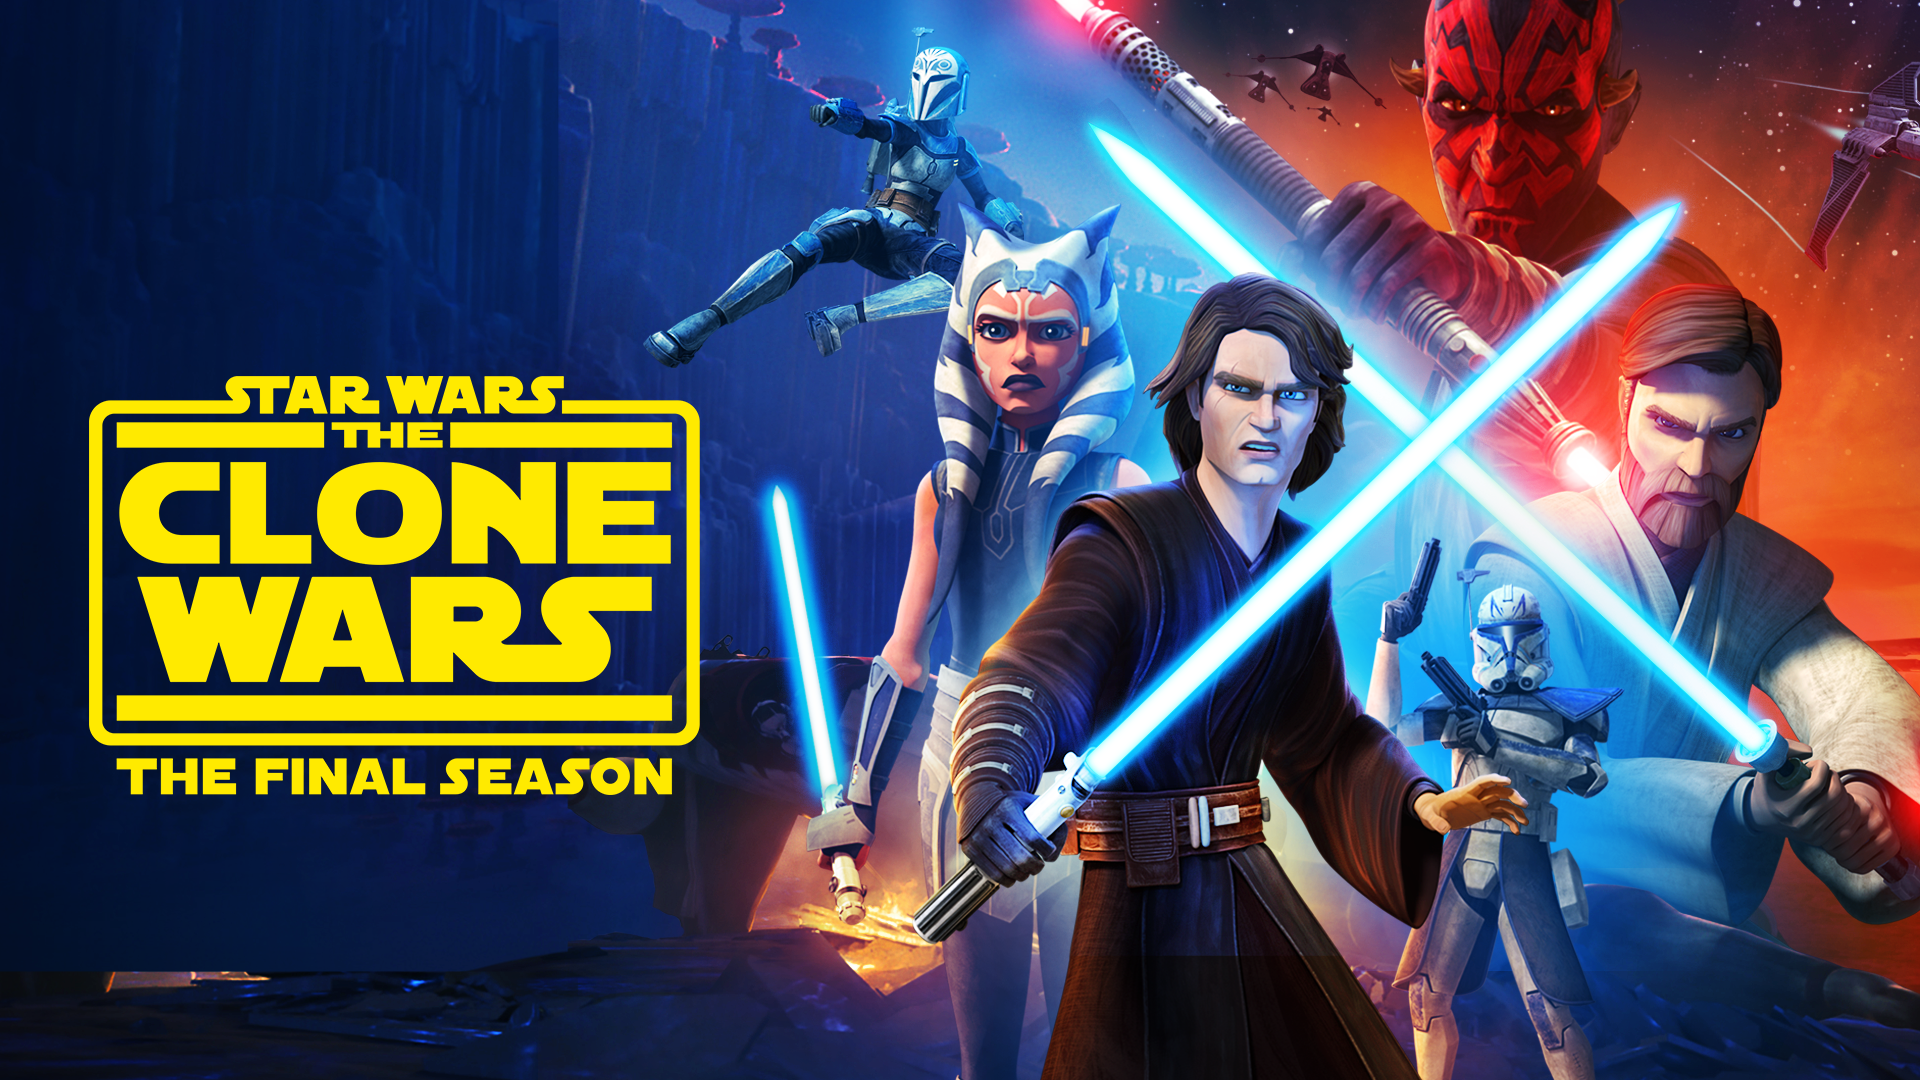 HD version of The Clone Wars Season 7 promotional banner